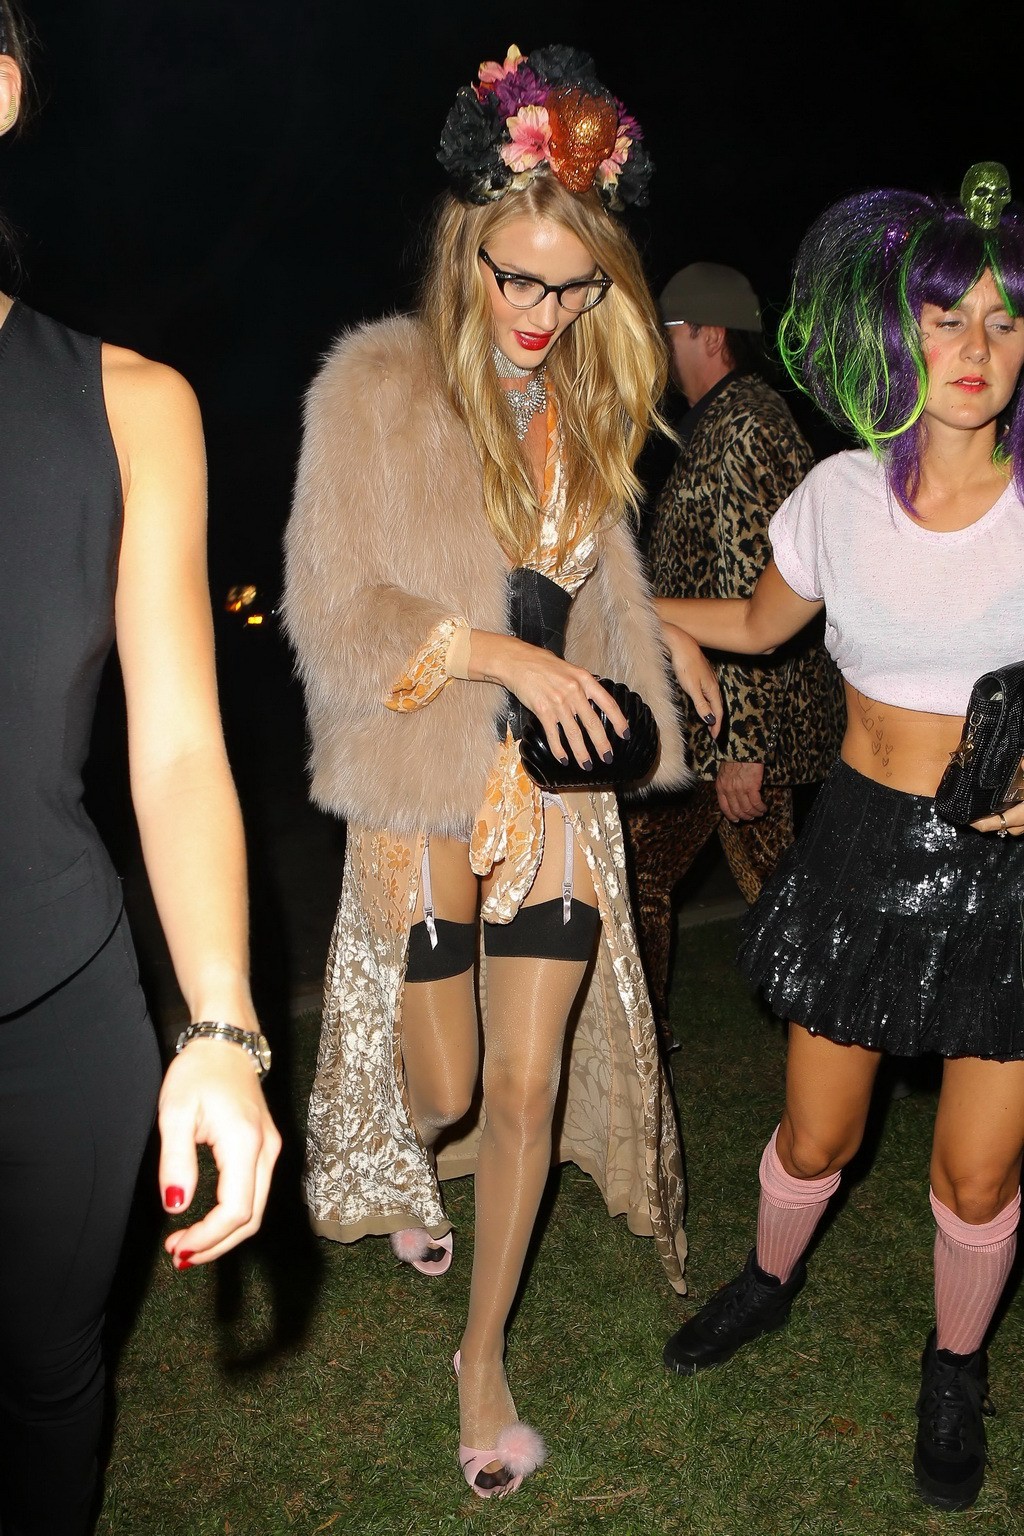 Rosie Huntington Whiteley wearing hot lingerie and stockings at Halloween party  #75249583